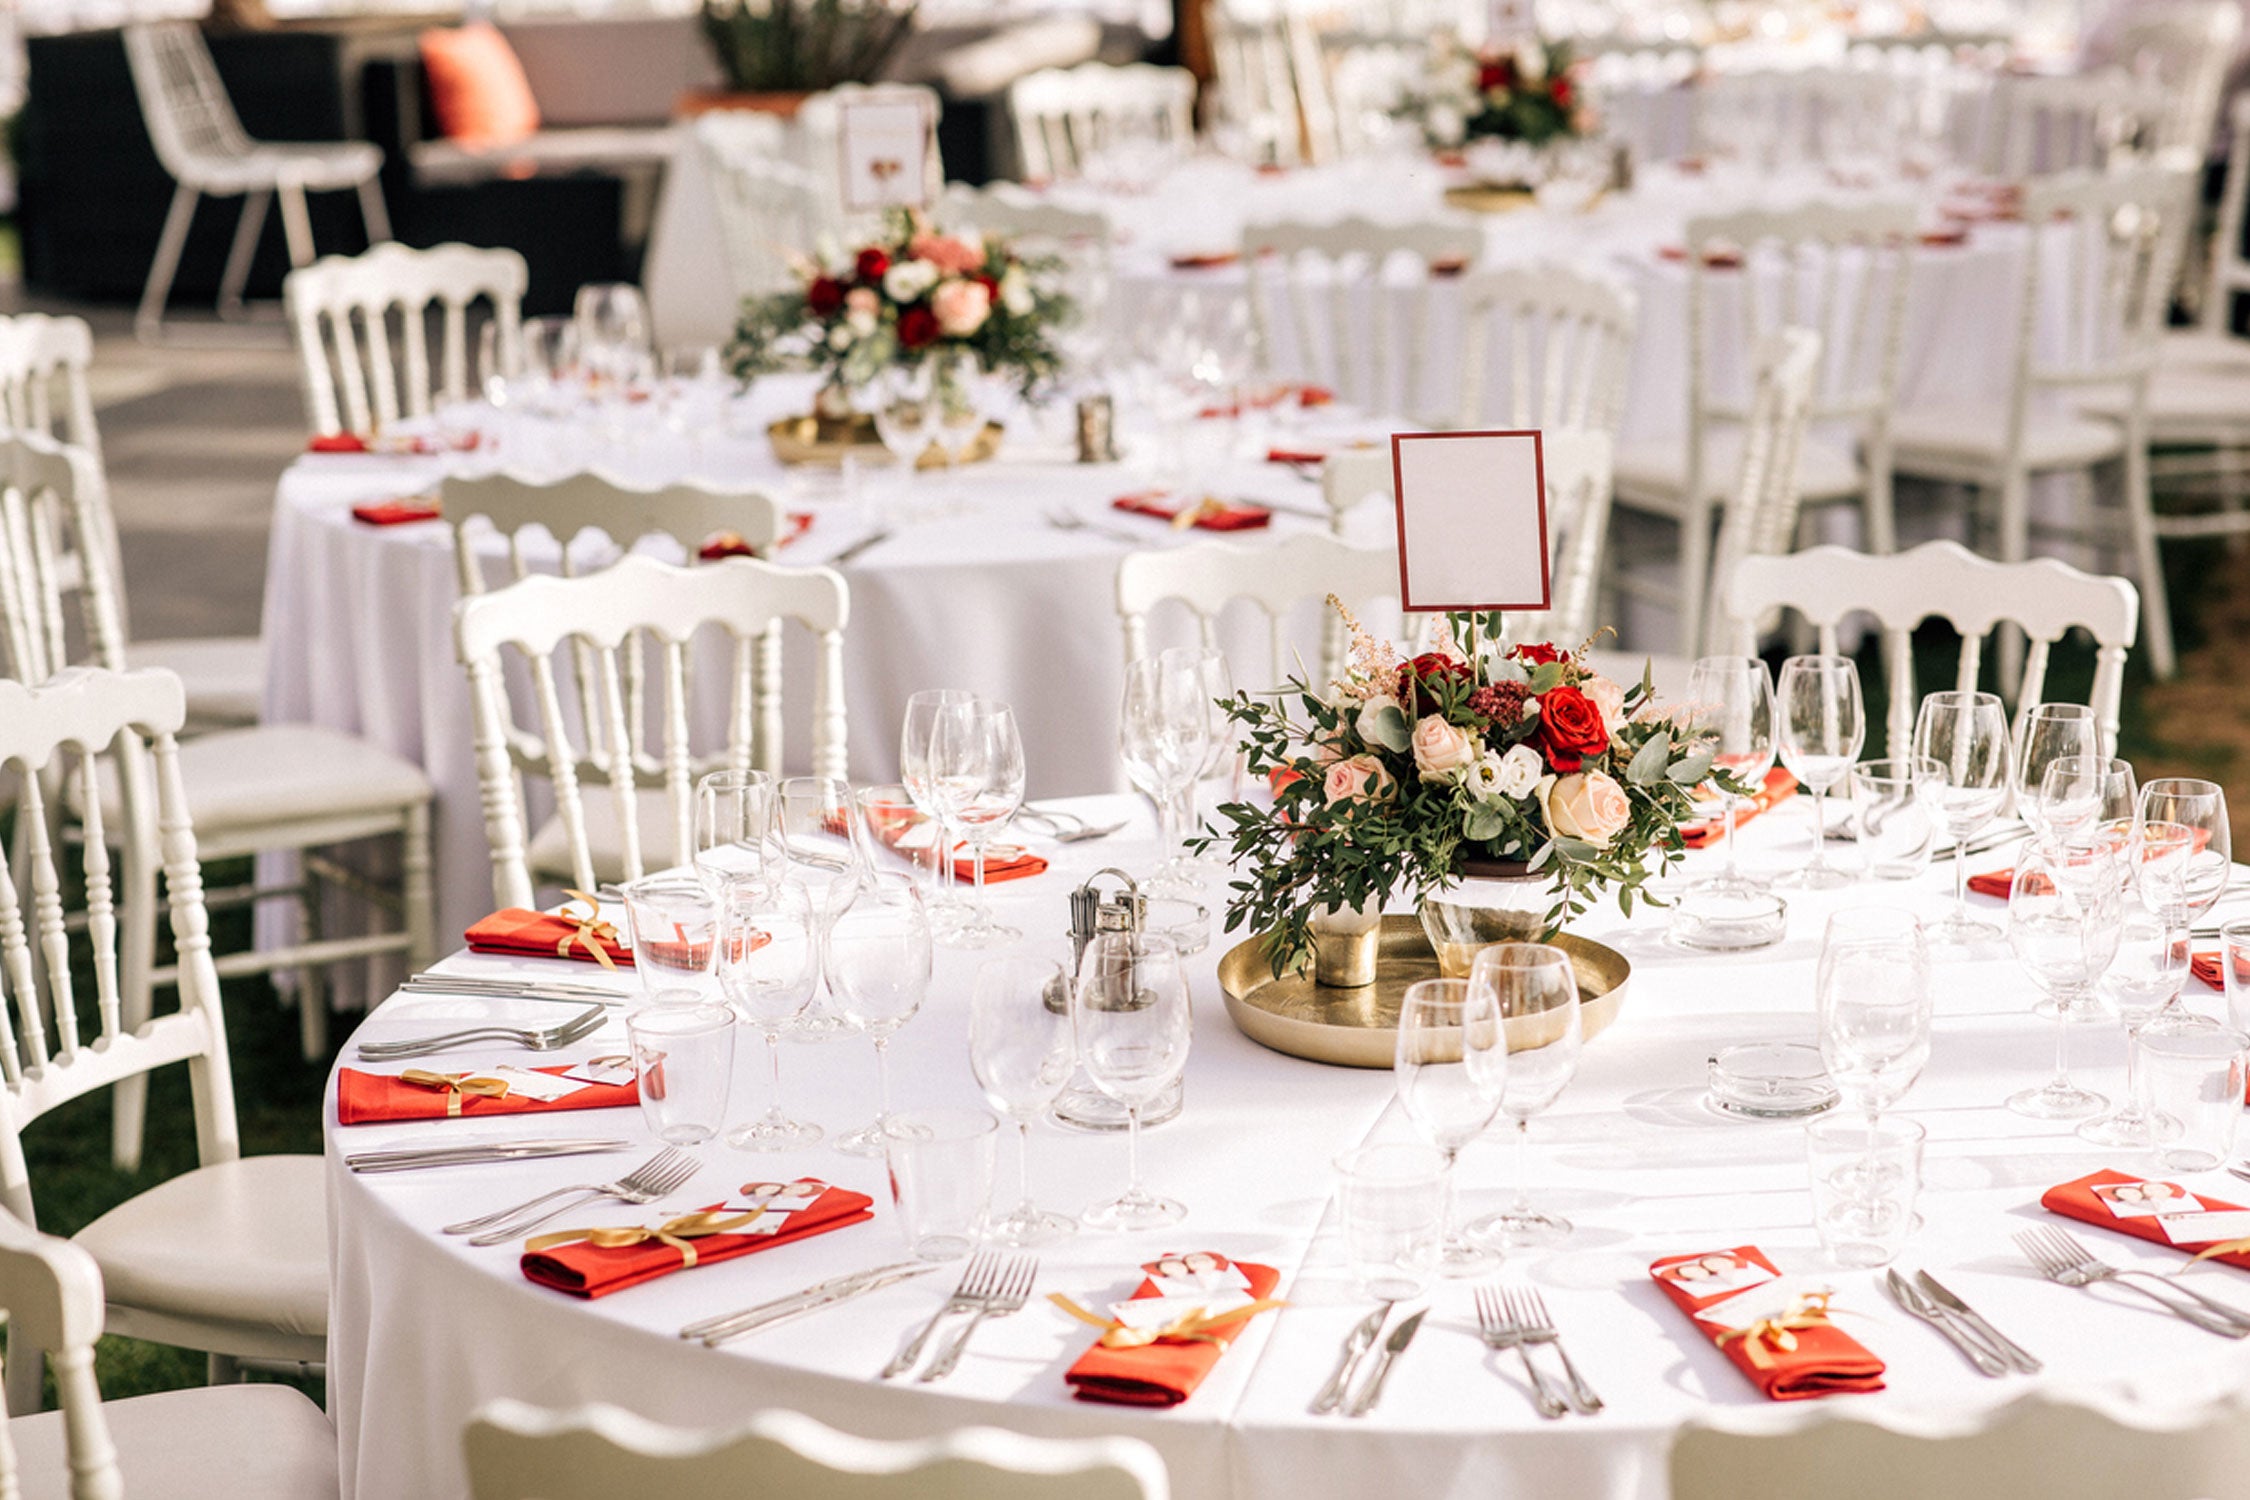 Table Linen Guide: How to Pick the Right Table Linen for Your Event